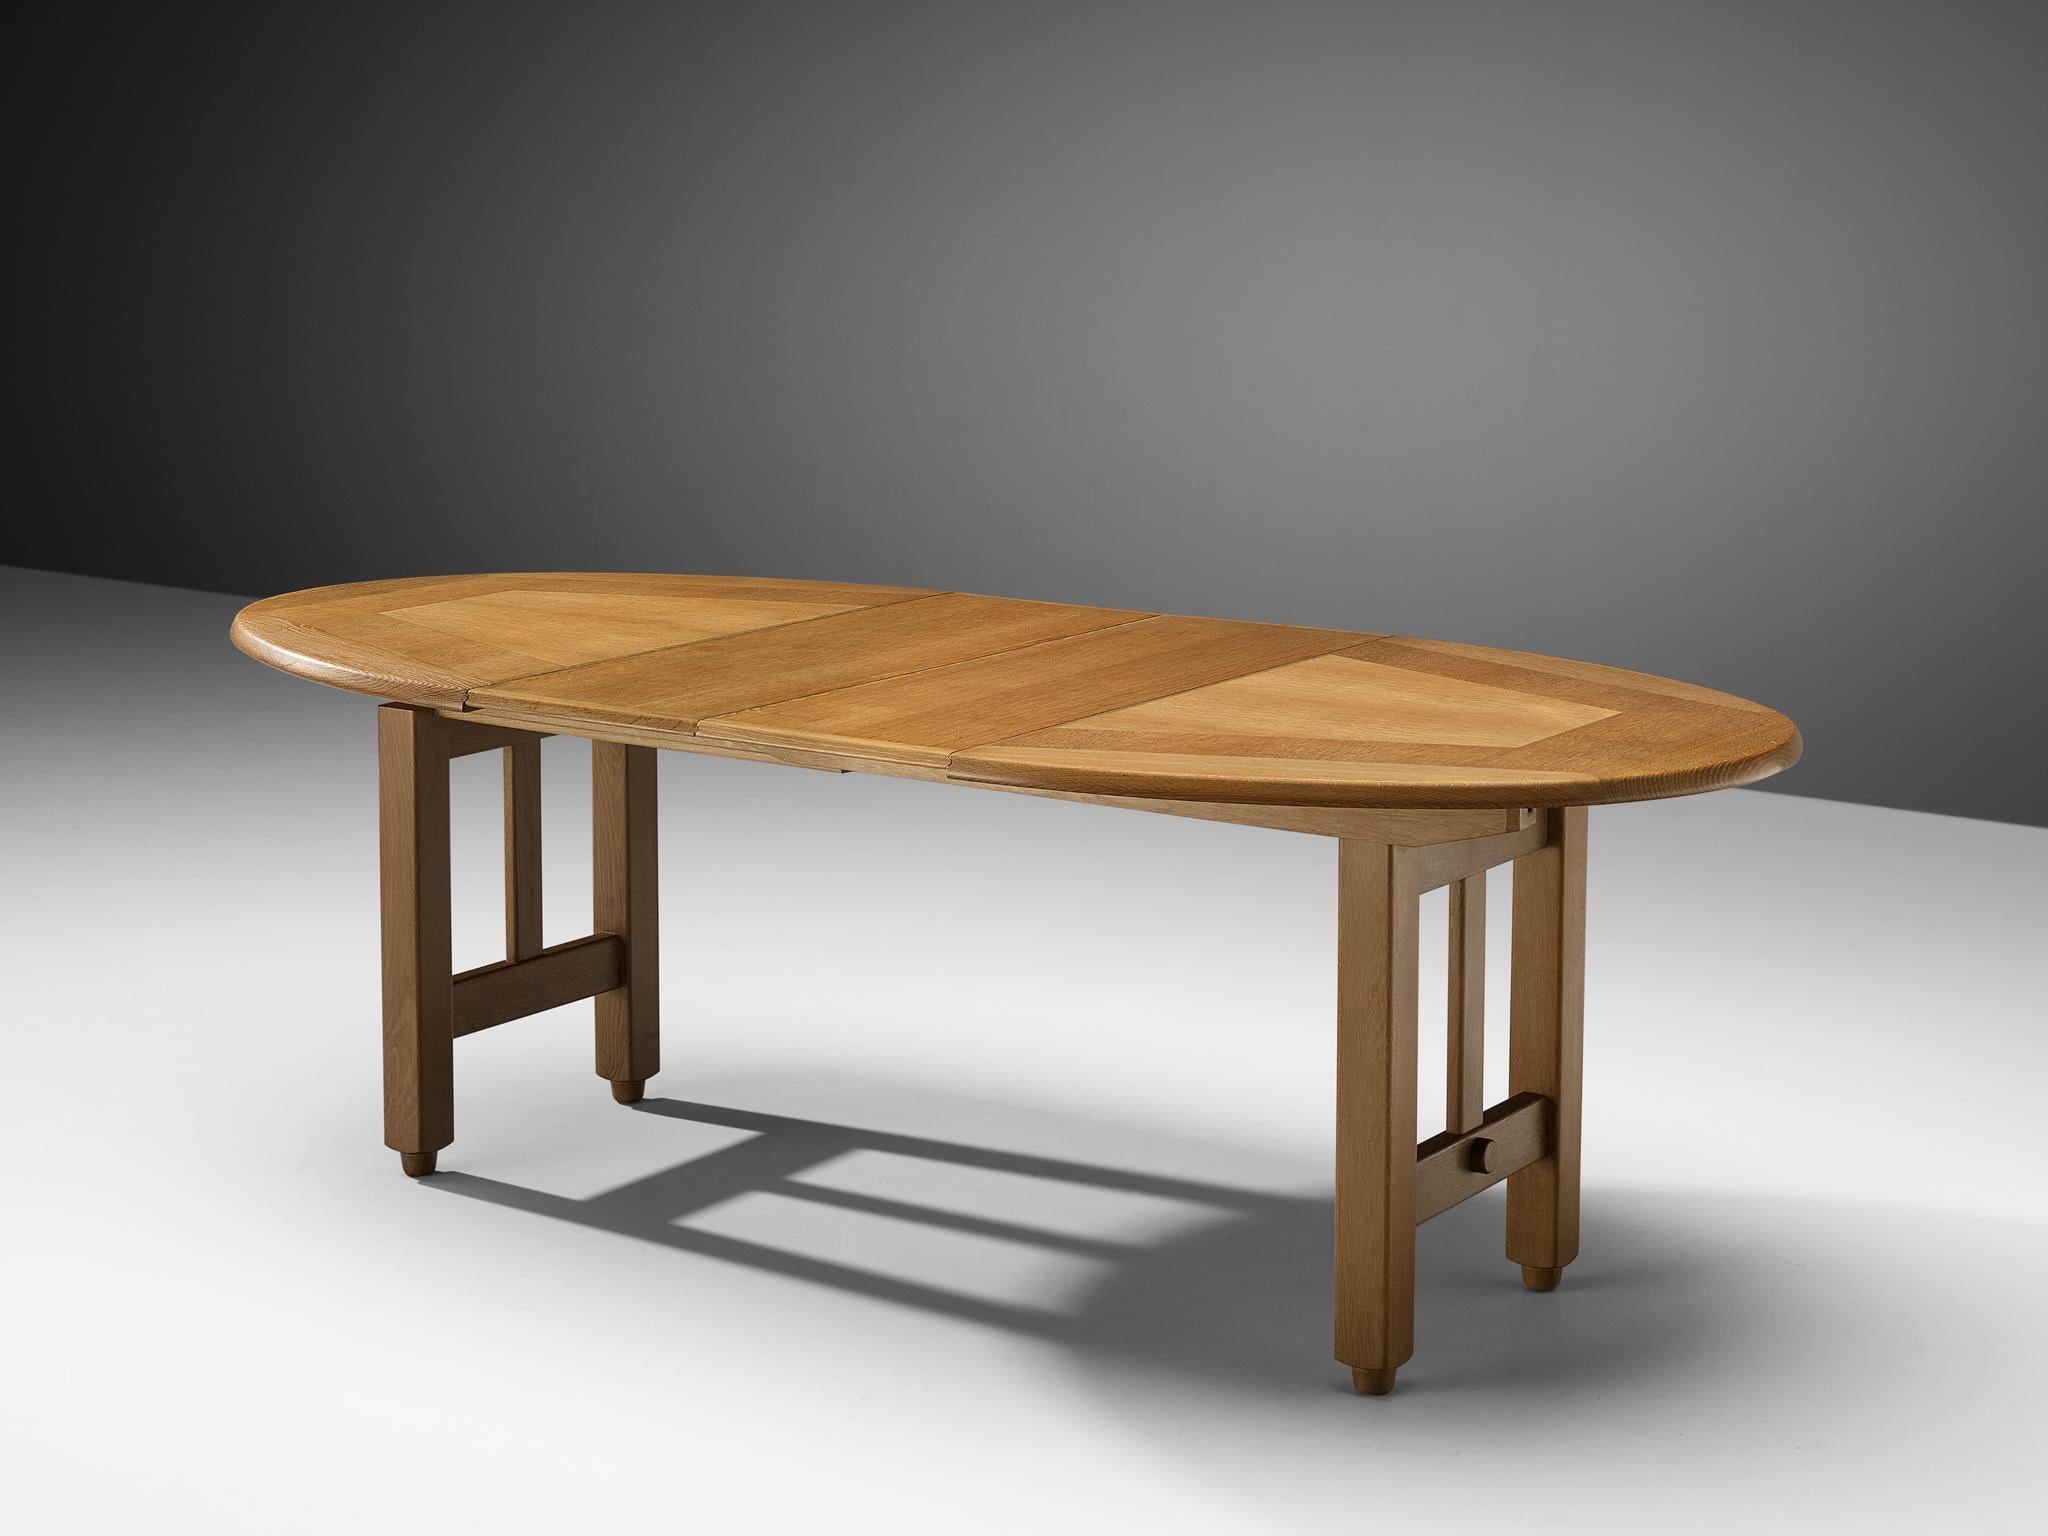 Guillerme et Chambron, extendable dining table, oak, 1960s

Round shaped dining table with inlayed top. This extendable table in solid oak comes with two additional leaves, which makes it a very versatile item. The sculptural two legged base has the